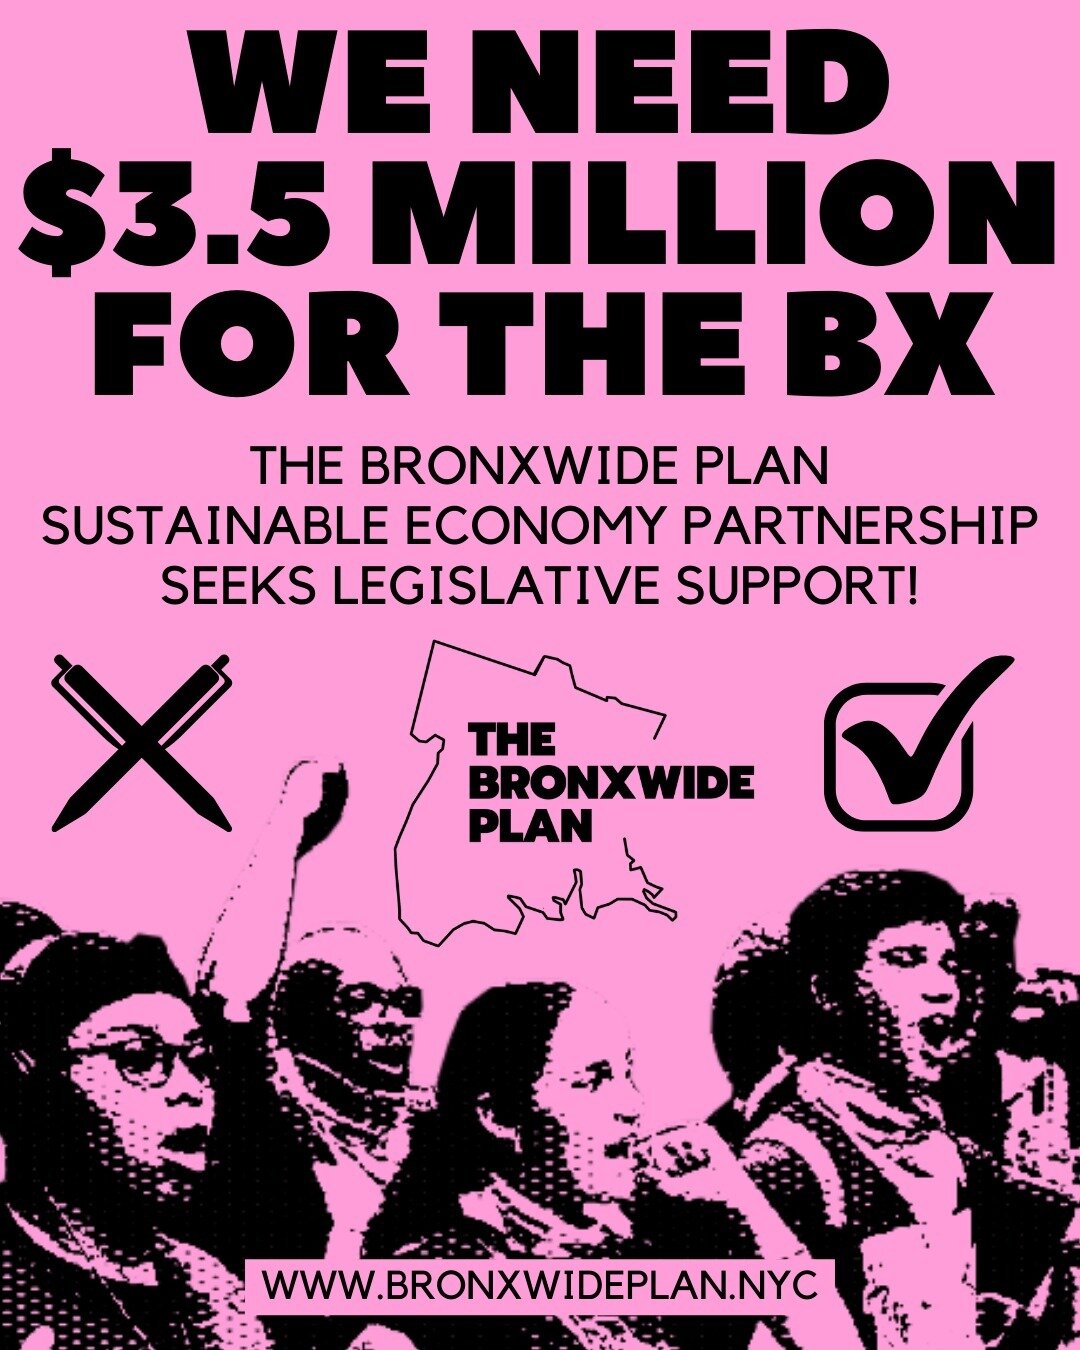 A shared Bronx economy depends critically on NY State climate funding! 

We&rsquo;re asking our state legislators to direct $3.5 million towards The Bronxwide Plan Sustainable Economy Partnership.

💵👷🏽♻️👷🏾🛠️👷🏿🧱👷🏼🏗️

#BronxwidePlan&nbsp;#S